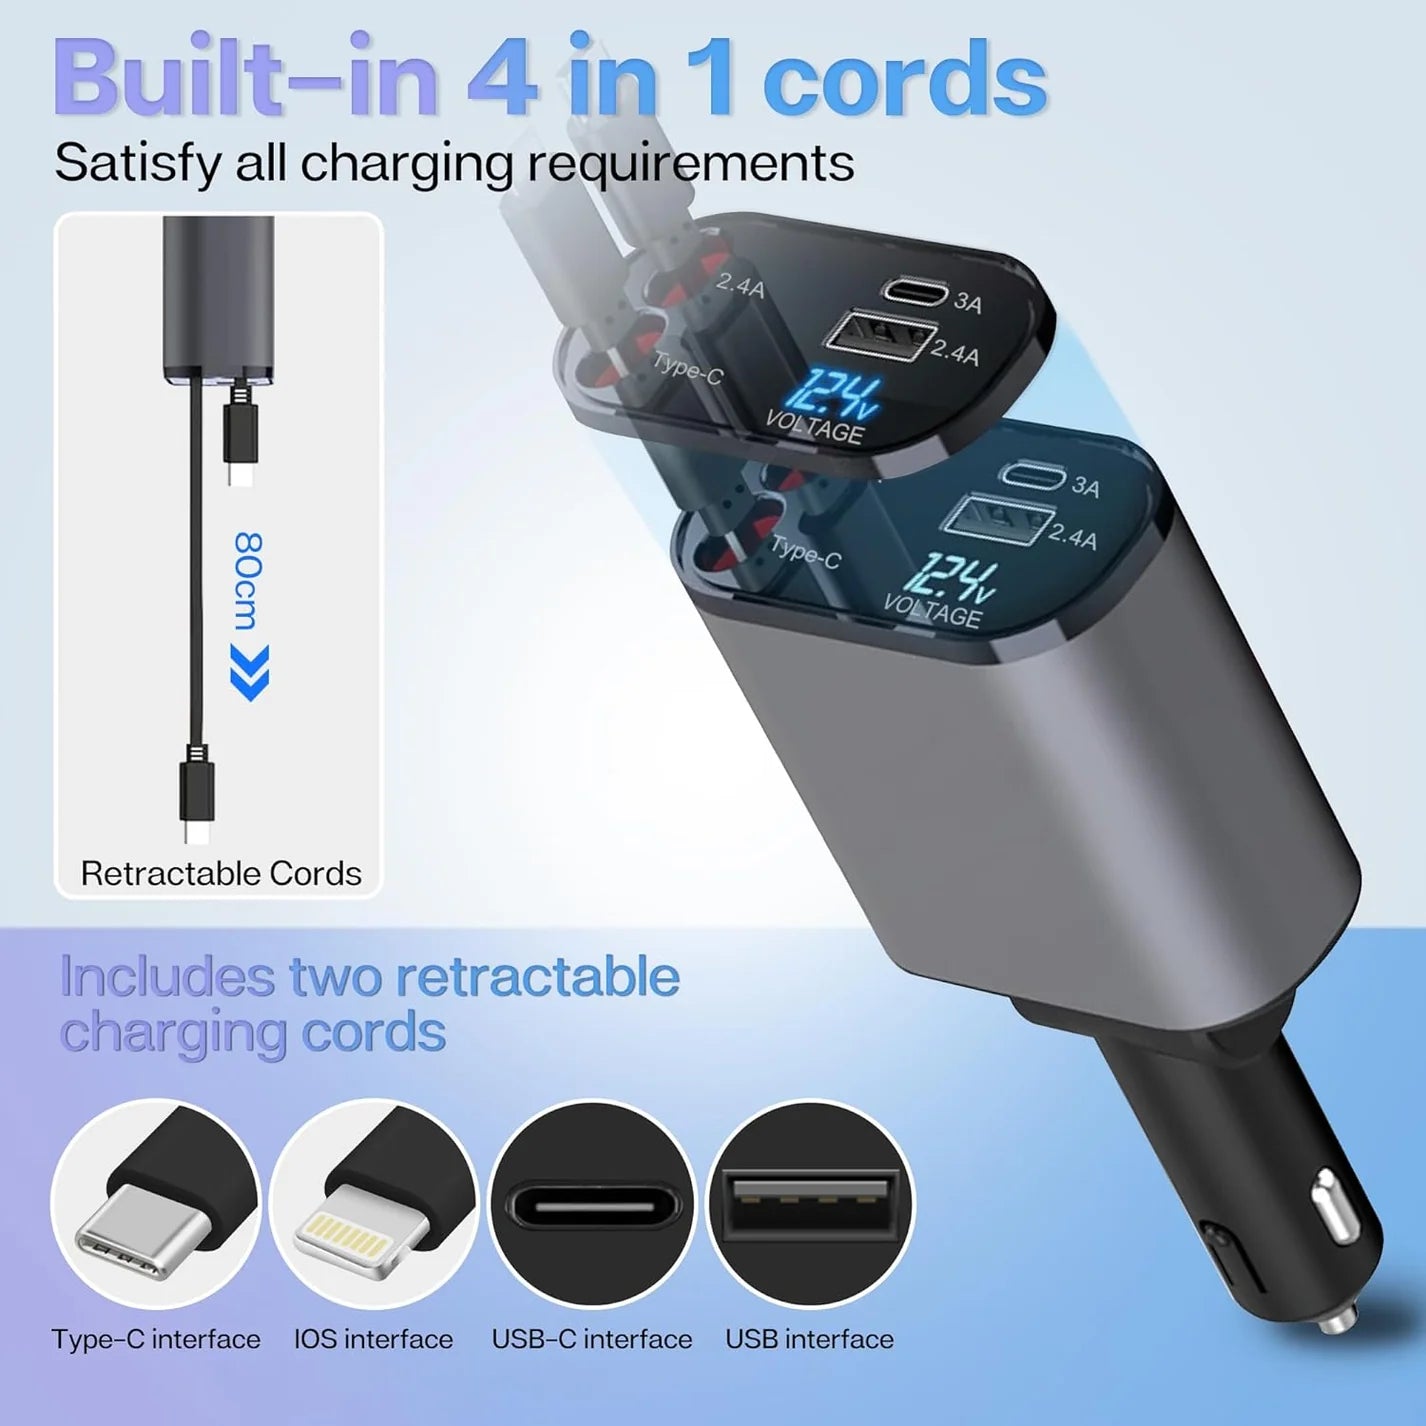 RhinoGuardAccessories Retractable Car Charger 120W 4 in 1 Superfast